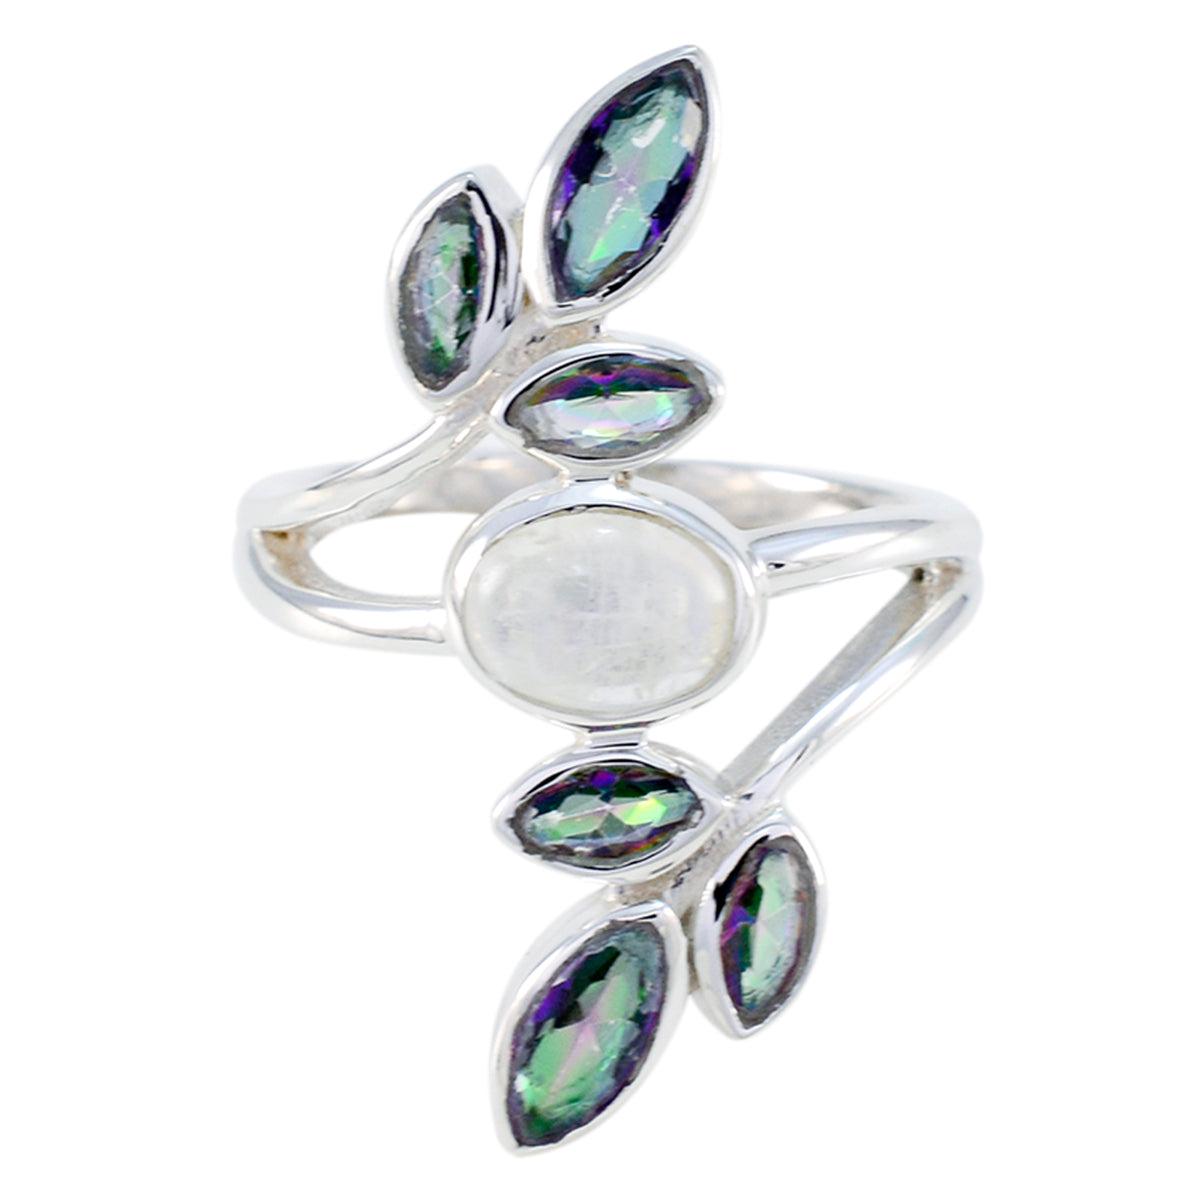 Statuesque Stone Multi Stone 925 Sterling Silver Ring Brown Jewelry